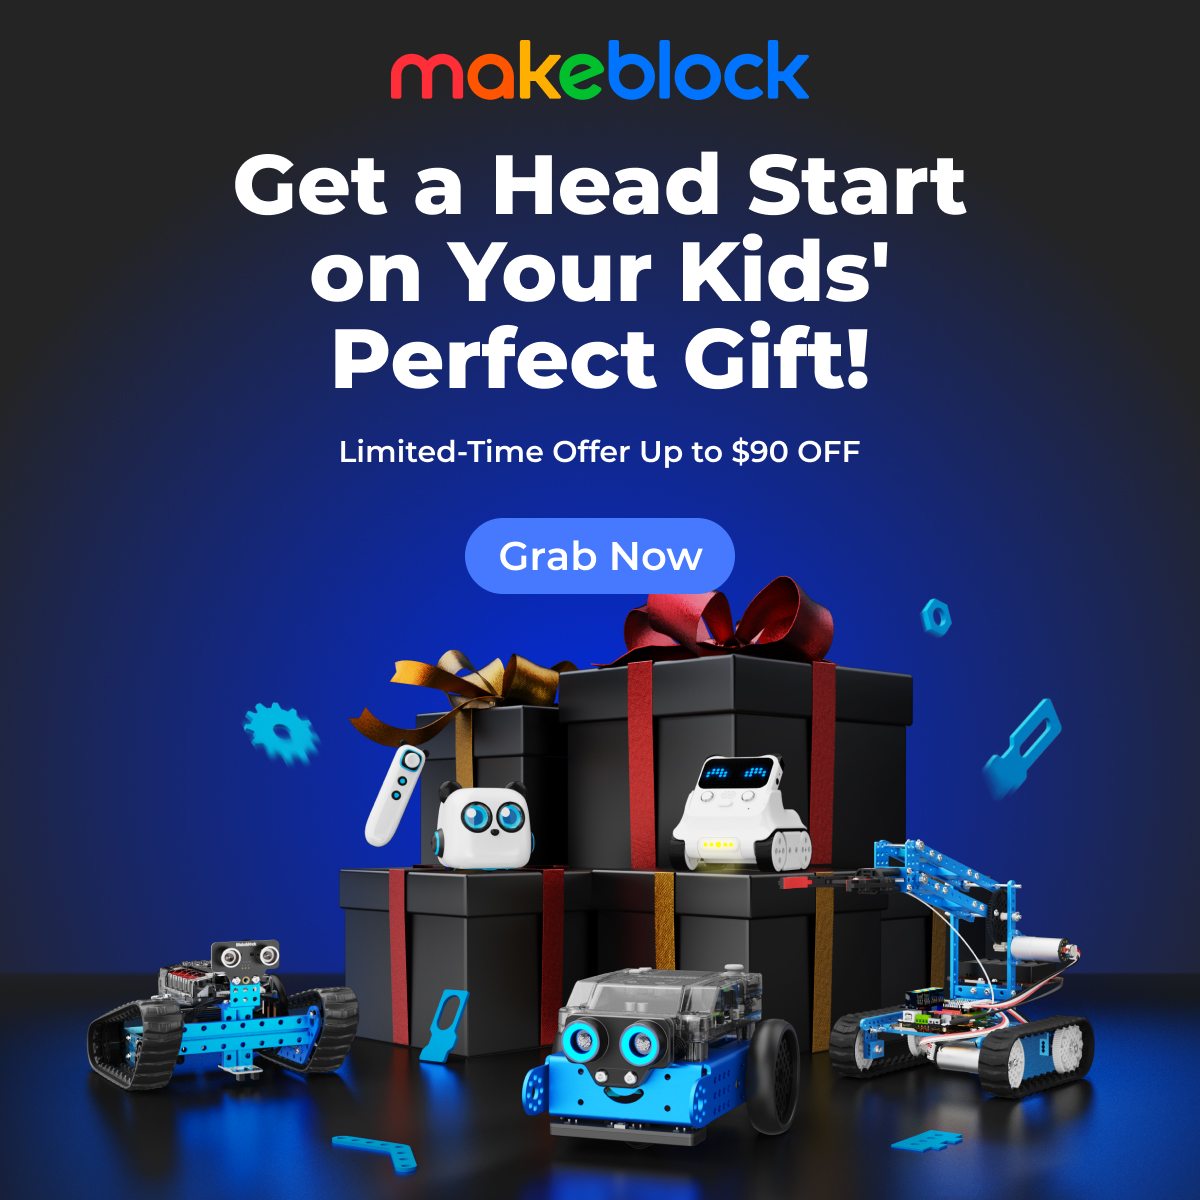 Plan Ahead for Your Kids' Perfect Gift!